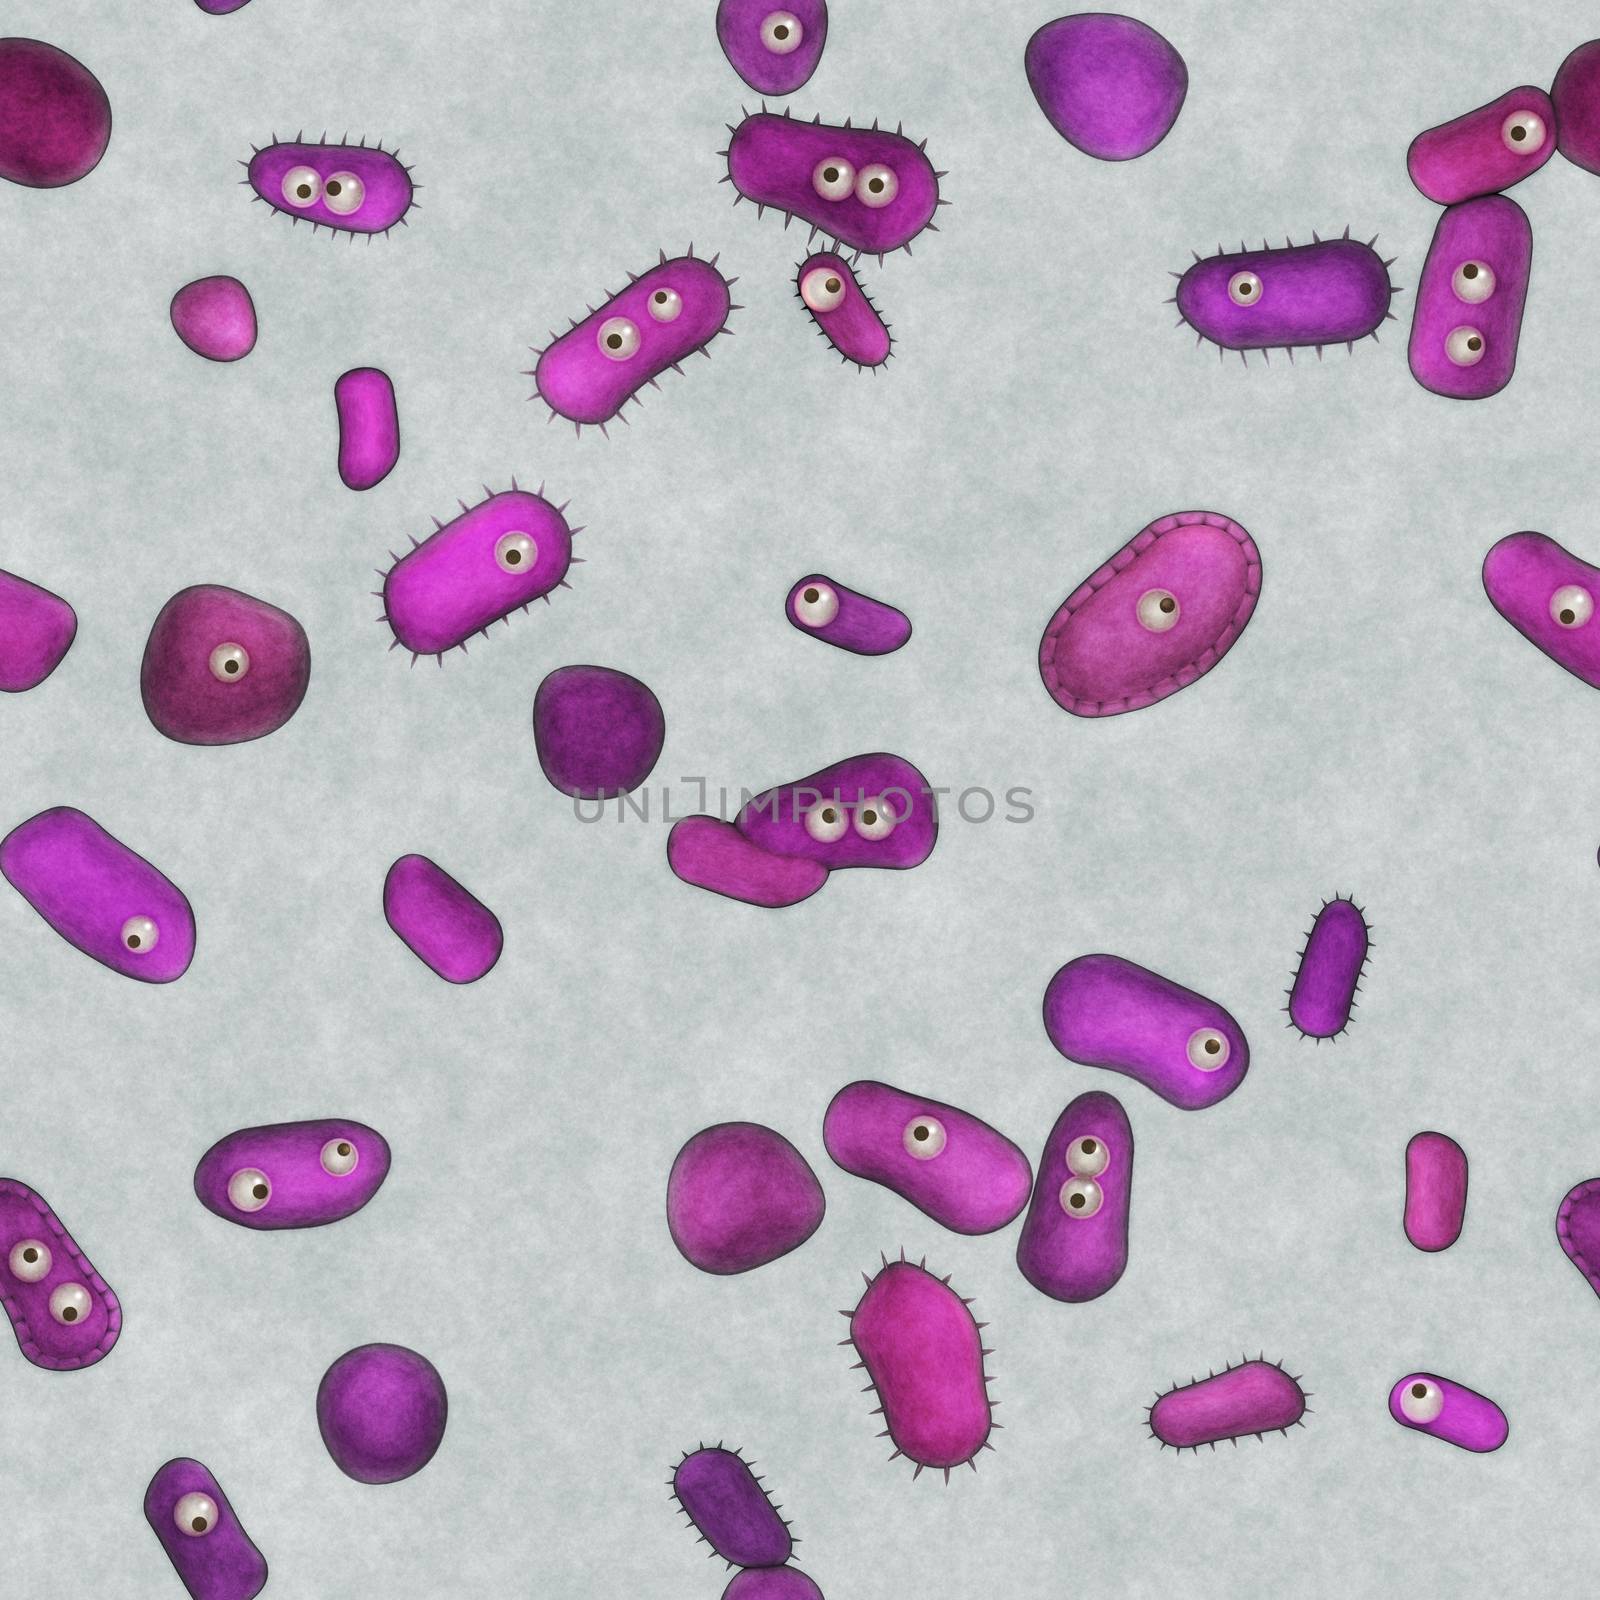 An illustration of a seamless pink microbes texture background